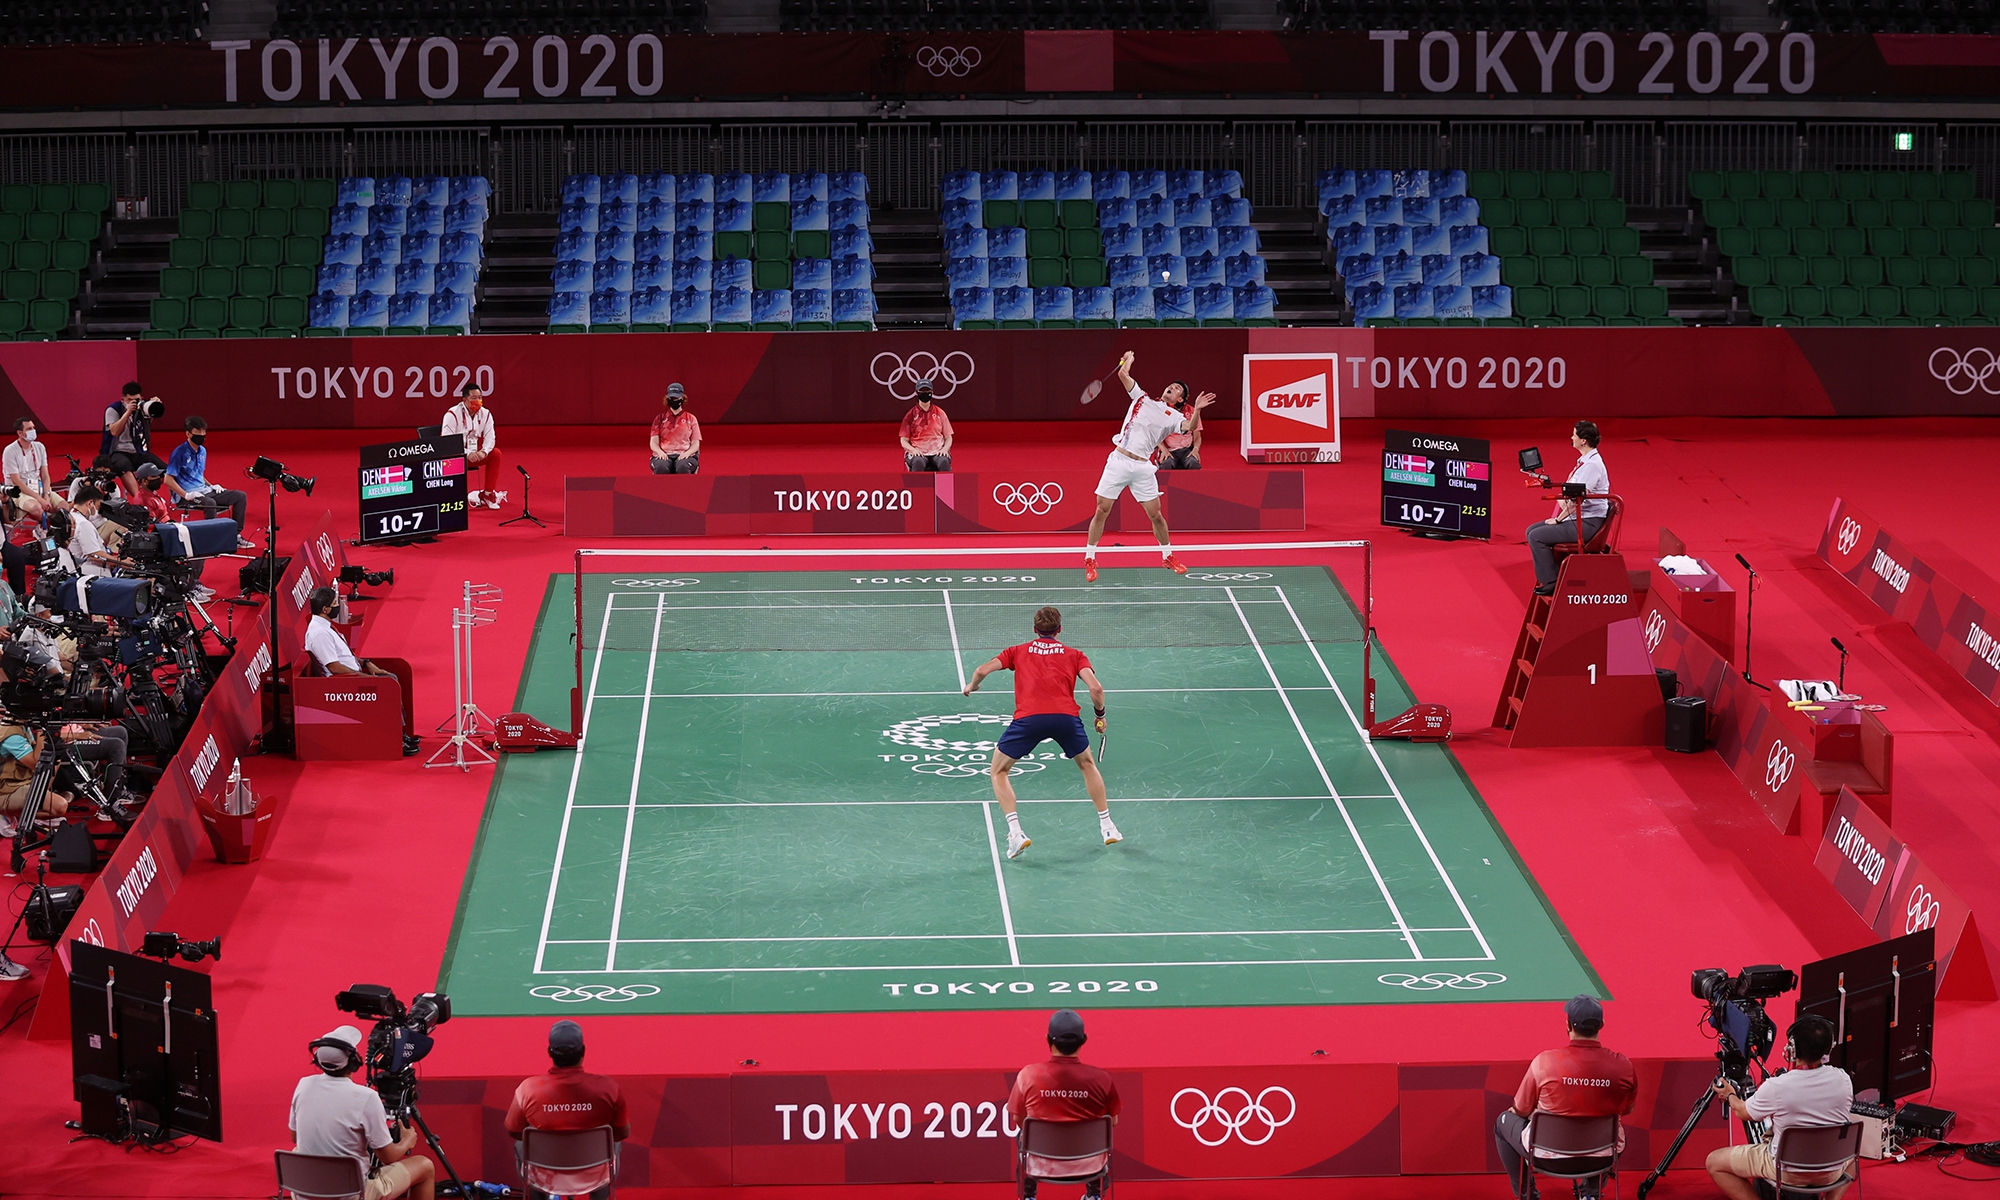 Live from Tokyo Chen Long grabs silver for China in the badminton mens singles while Denmarks Viktor Axelsen wins the gold